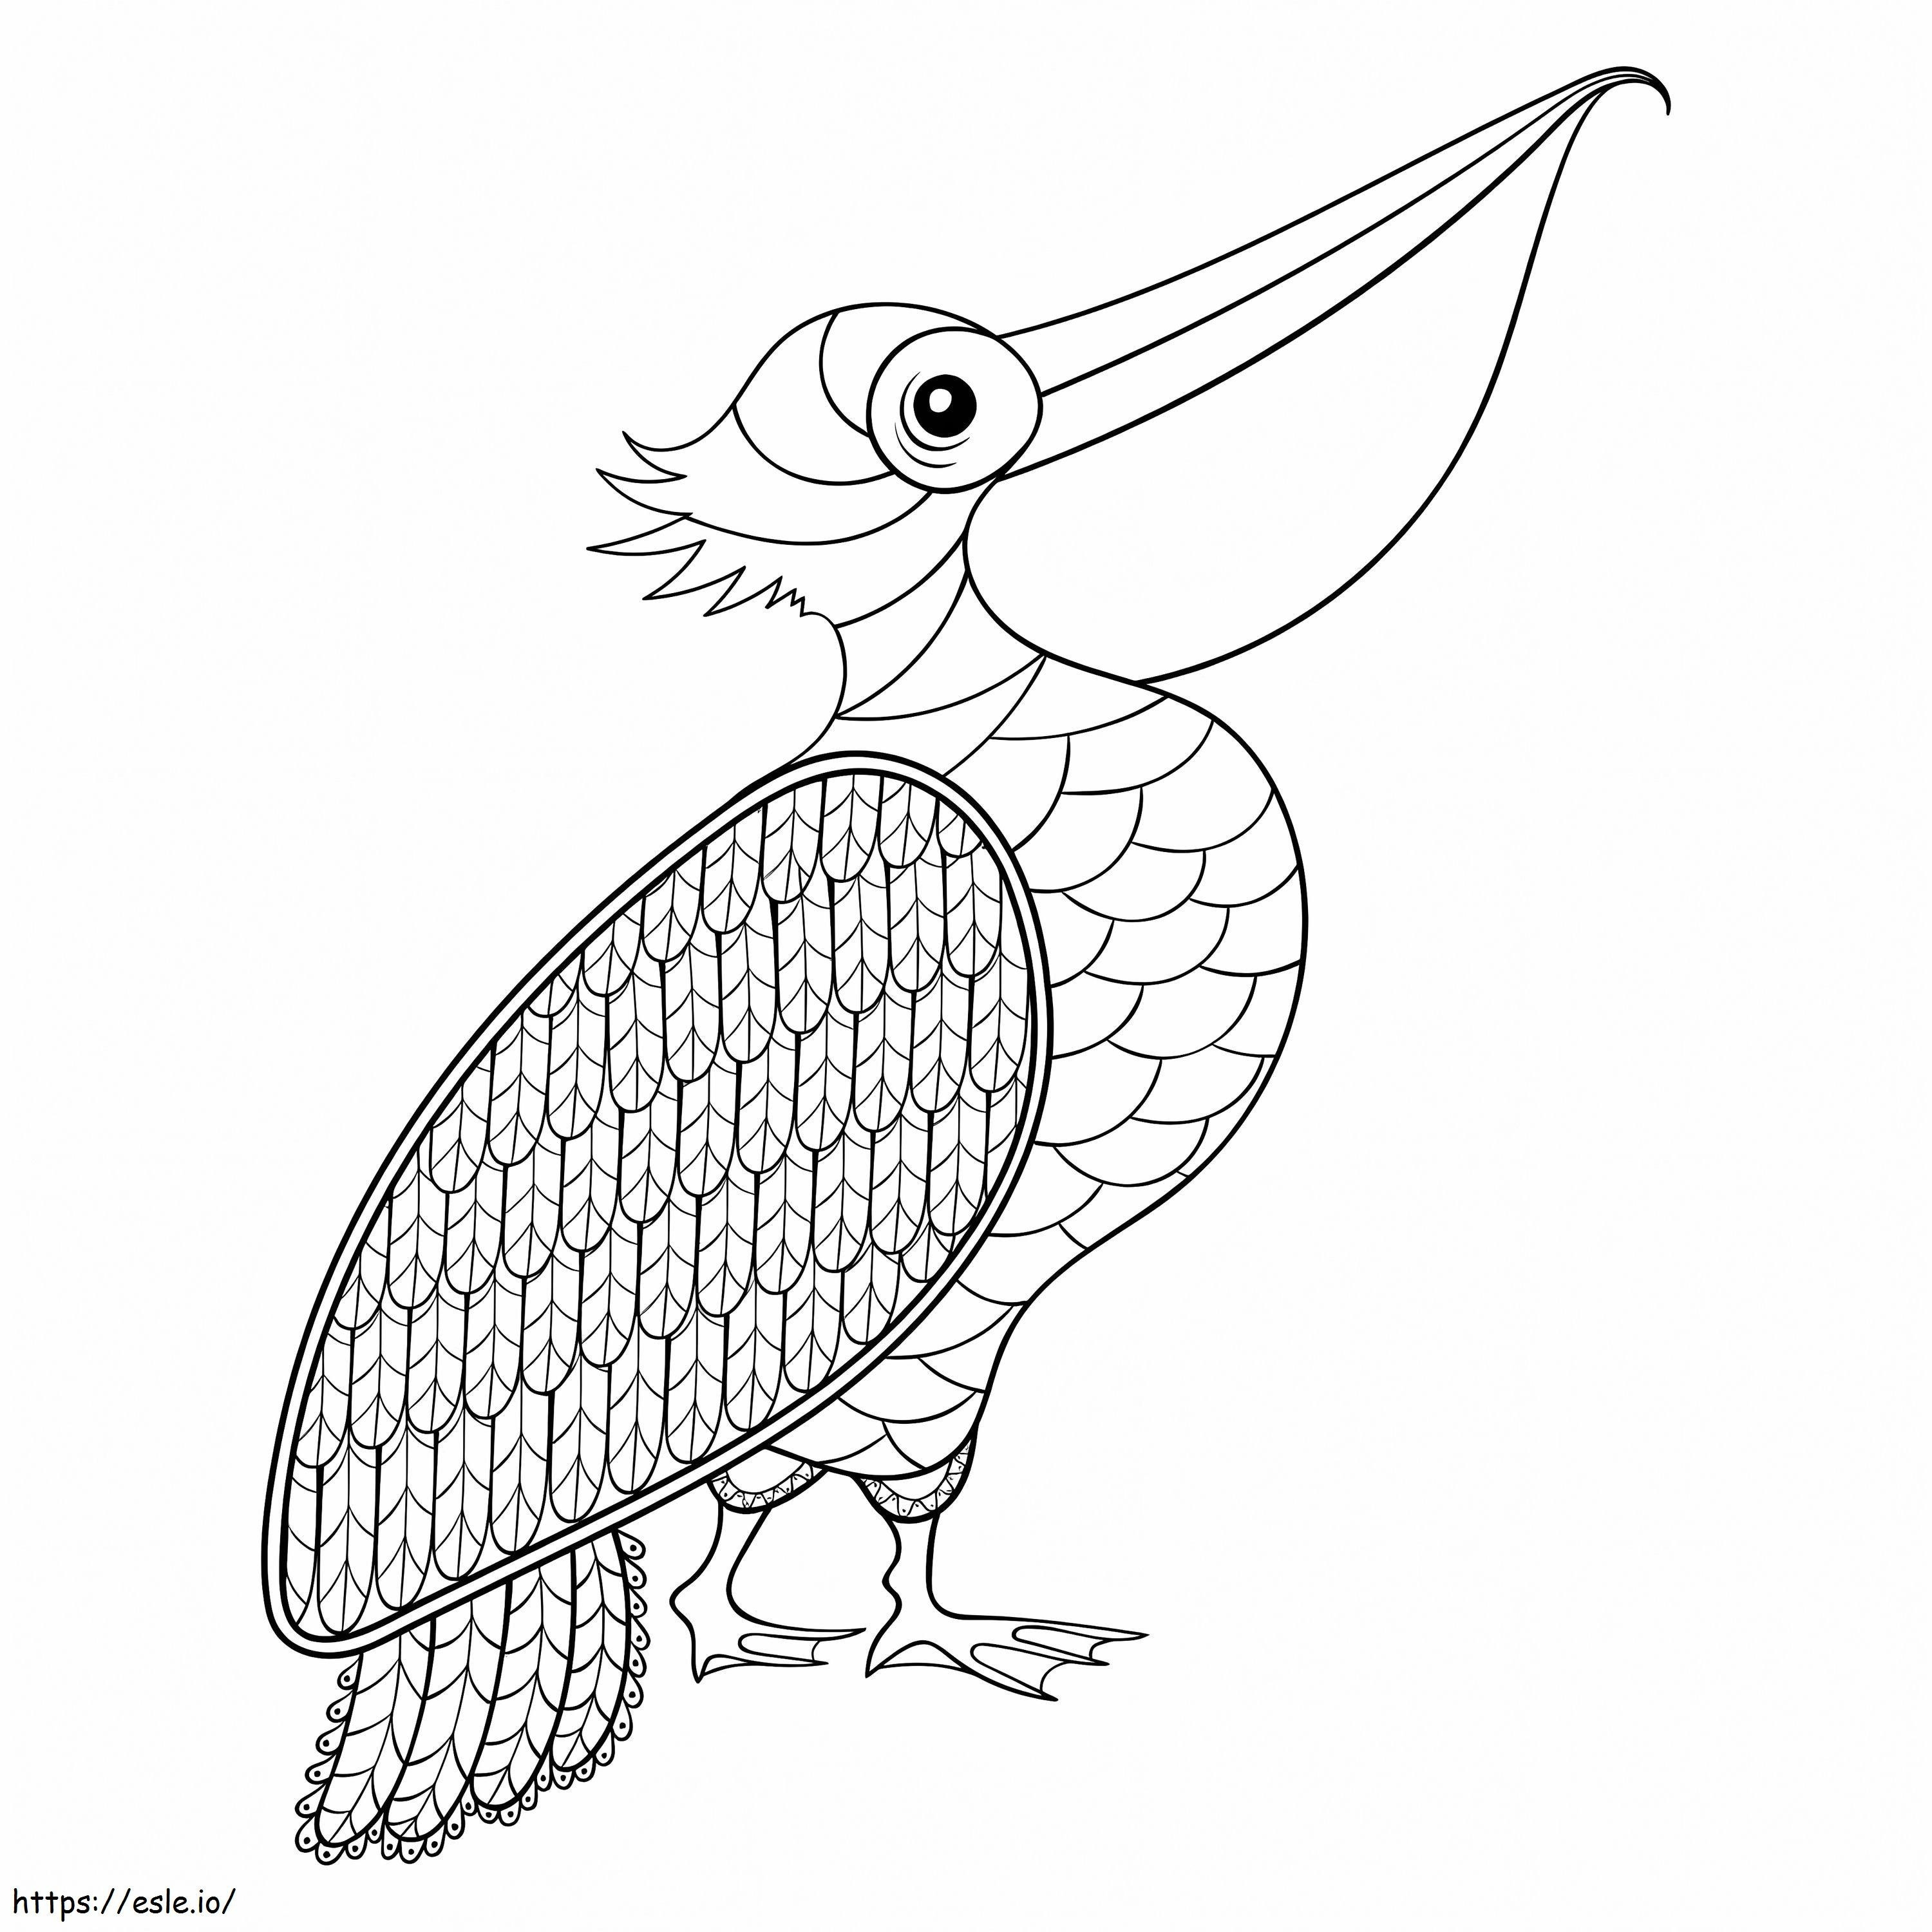 Perfect Pelican coloring page